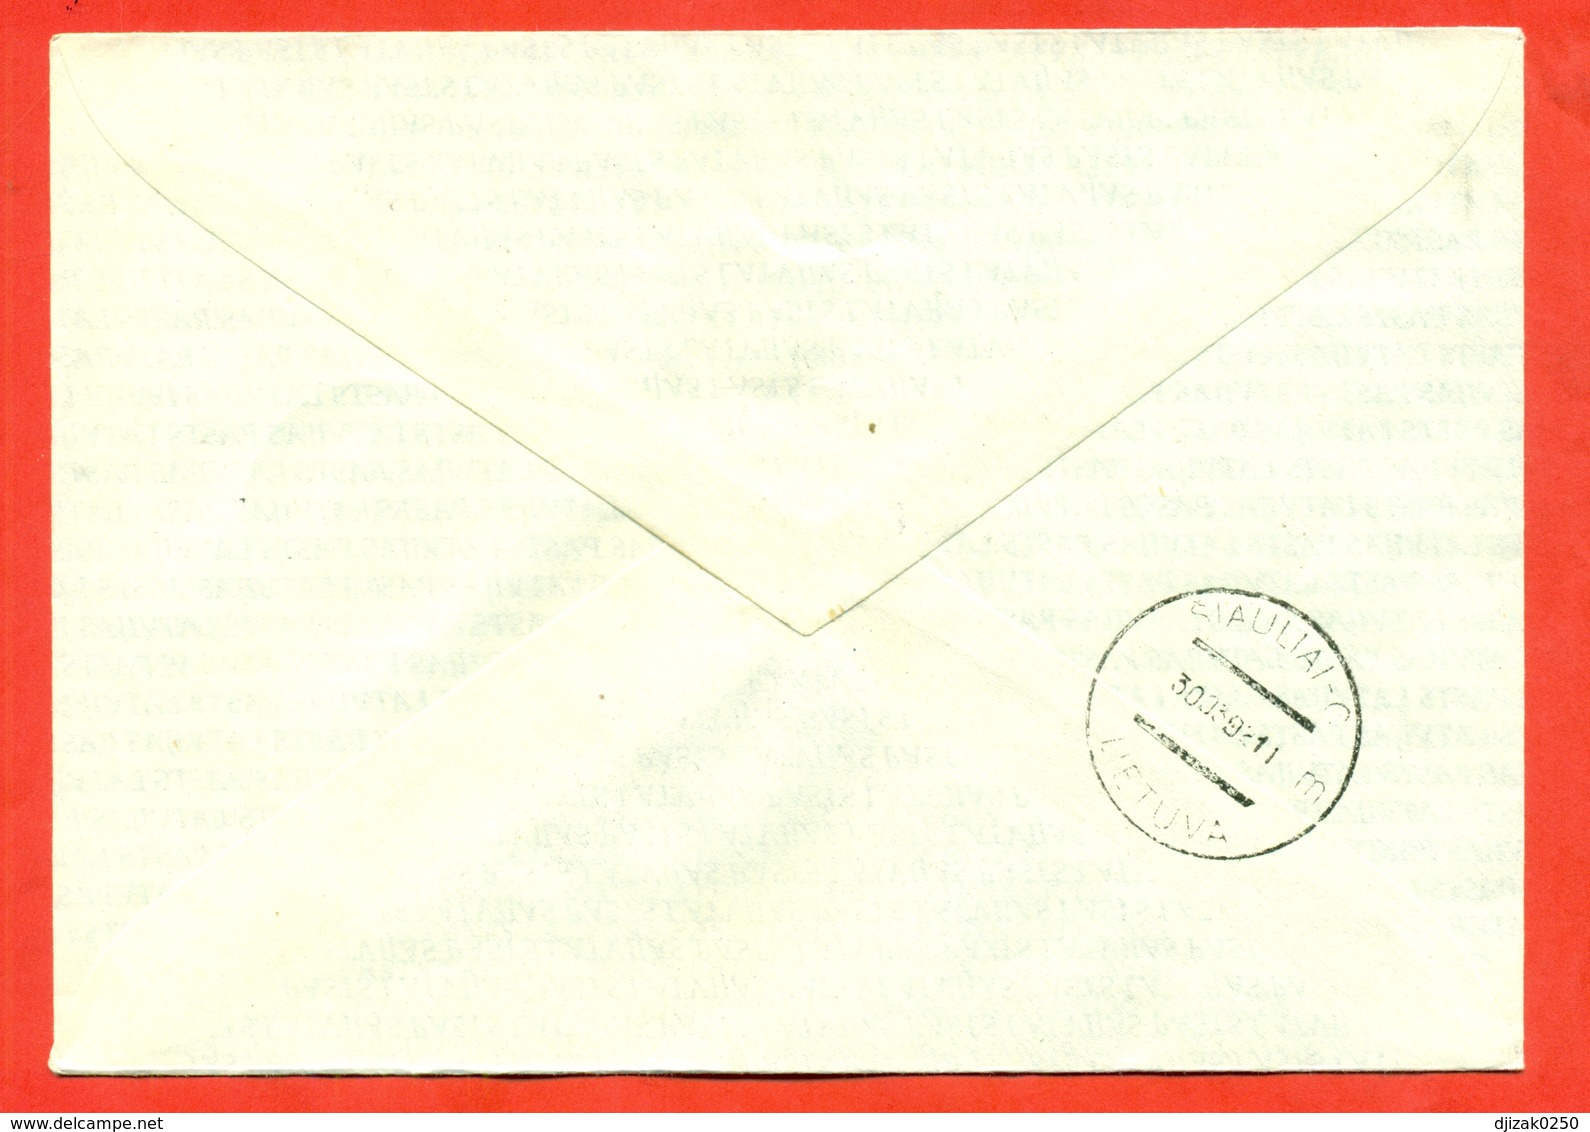 Latvia 1992.The Envelope With Printed Stamp Is Really Past Mail. Affranchissement Mixte De L'URSS-Lettonie. - Latvia